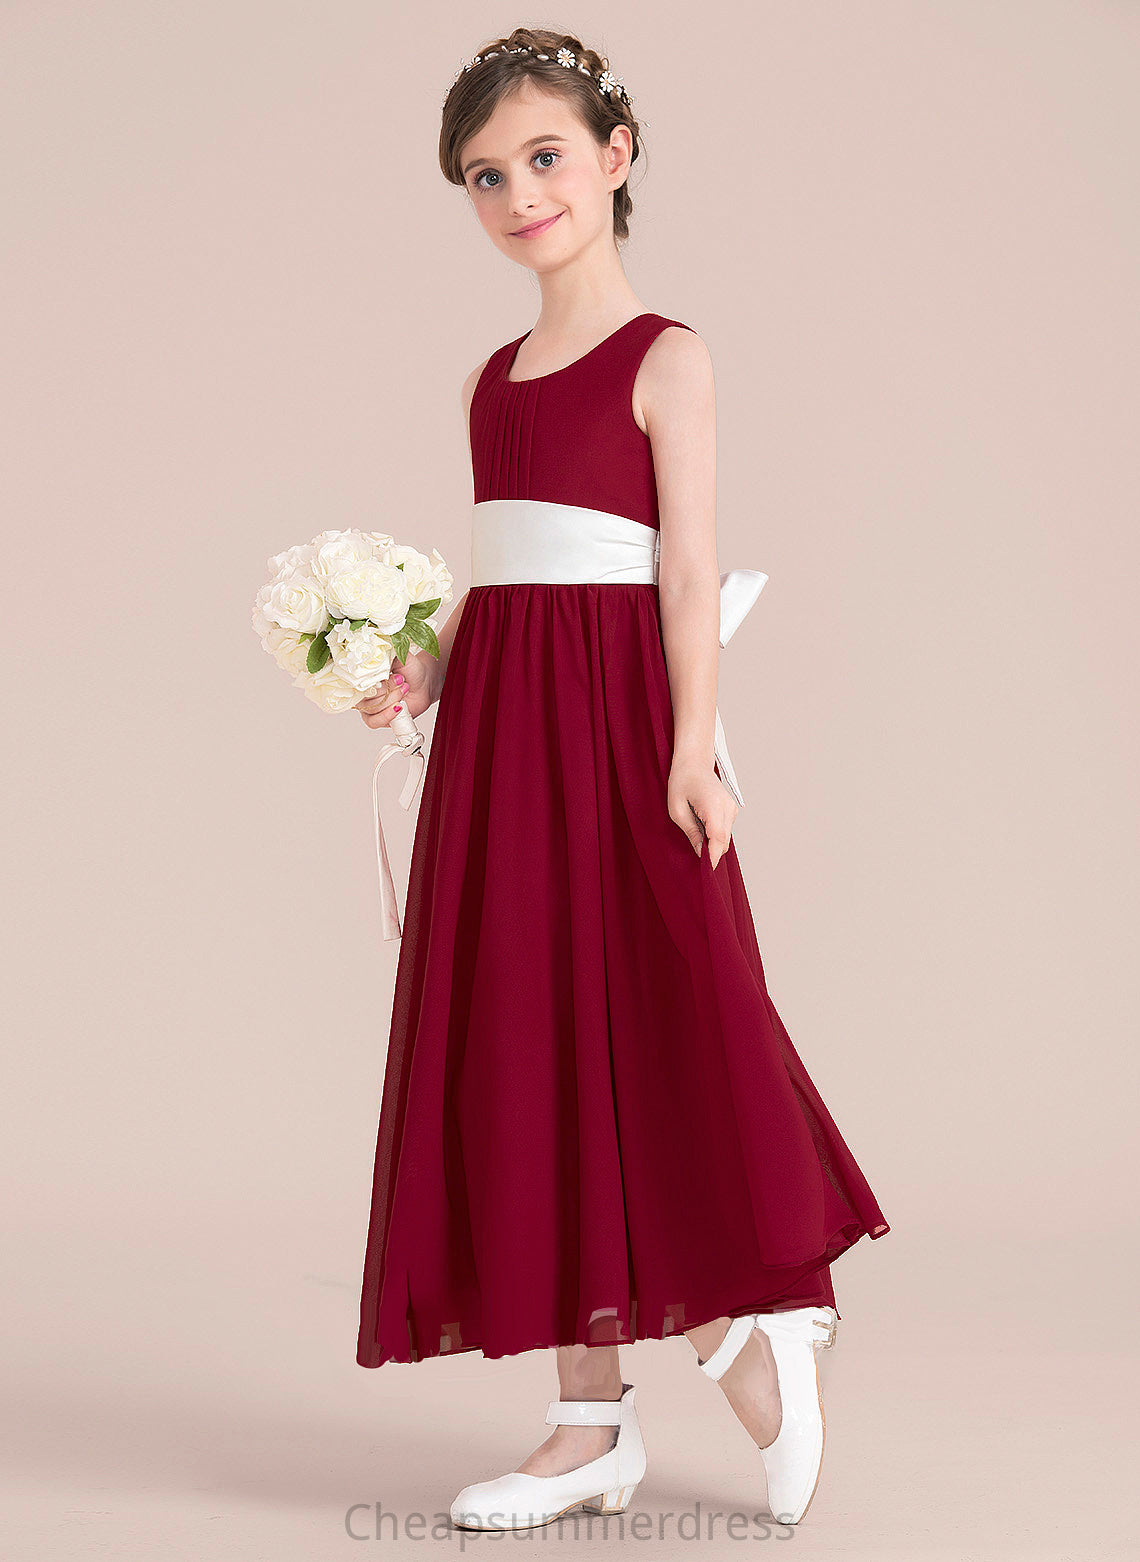 Empire Junior Bridesmaid Dresses Ankle-Length Scoop Neck A-Line Chiffon With Sash Shelby Bow(s)